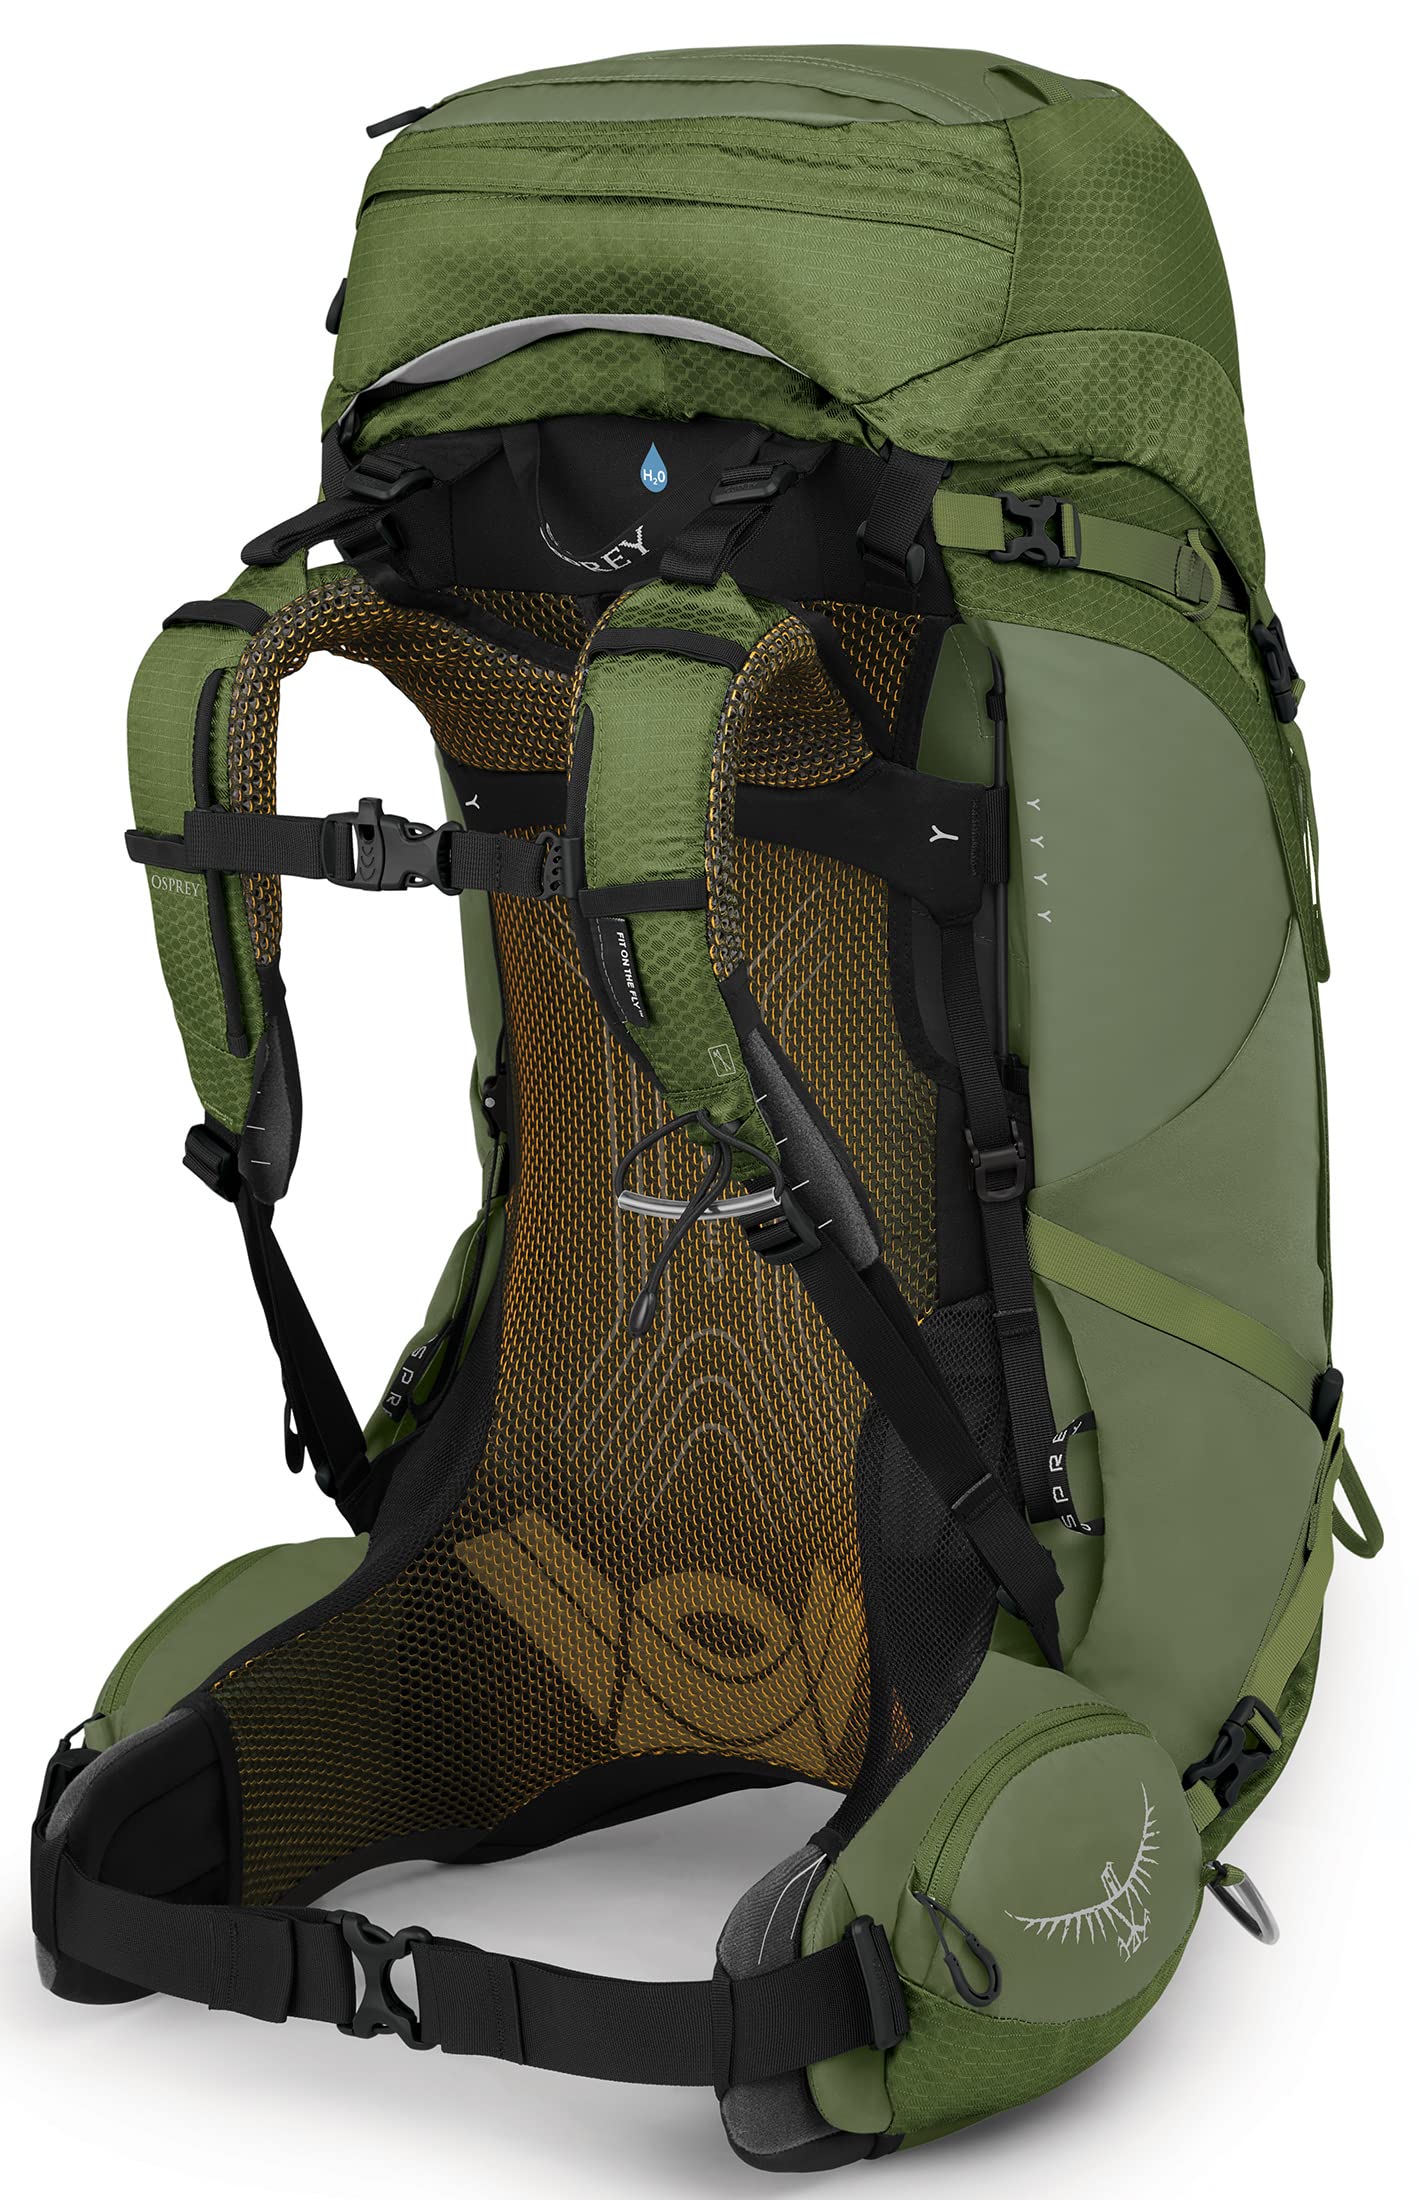 Osprey Atmos AG 50L Men's Backpacking Backpack, Mythical Green, L/XL